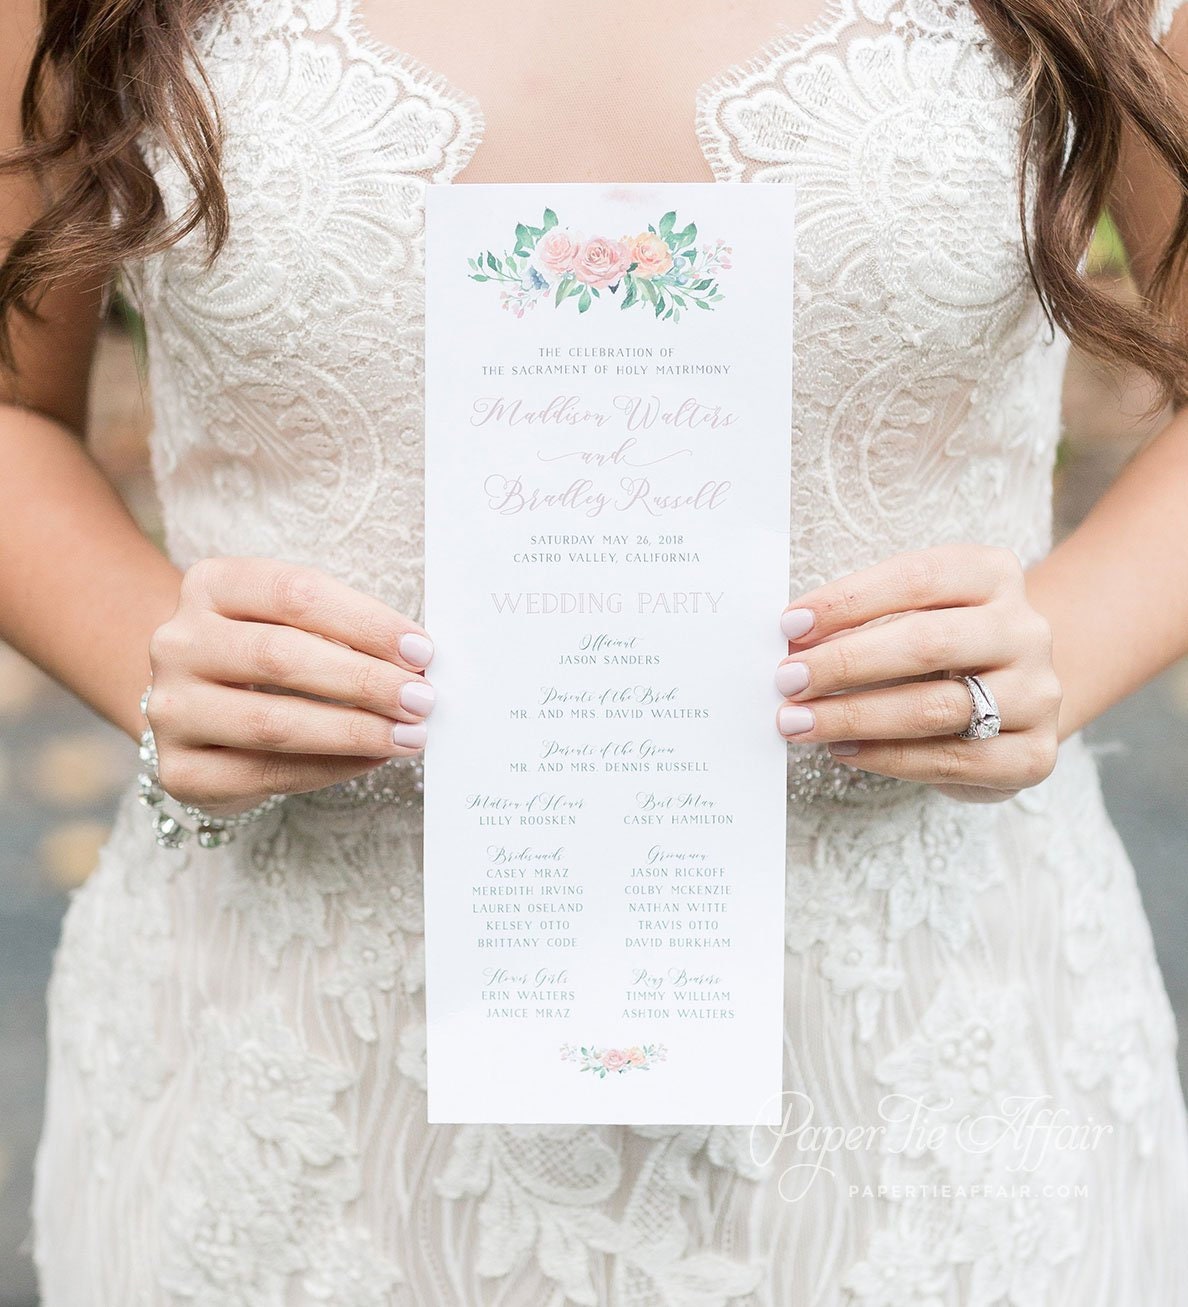 Floral Wedding Programs - Day Program Printed Ceremony Order Of Service Flowers, Watercolor, Greenery | Grace Wreath